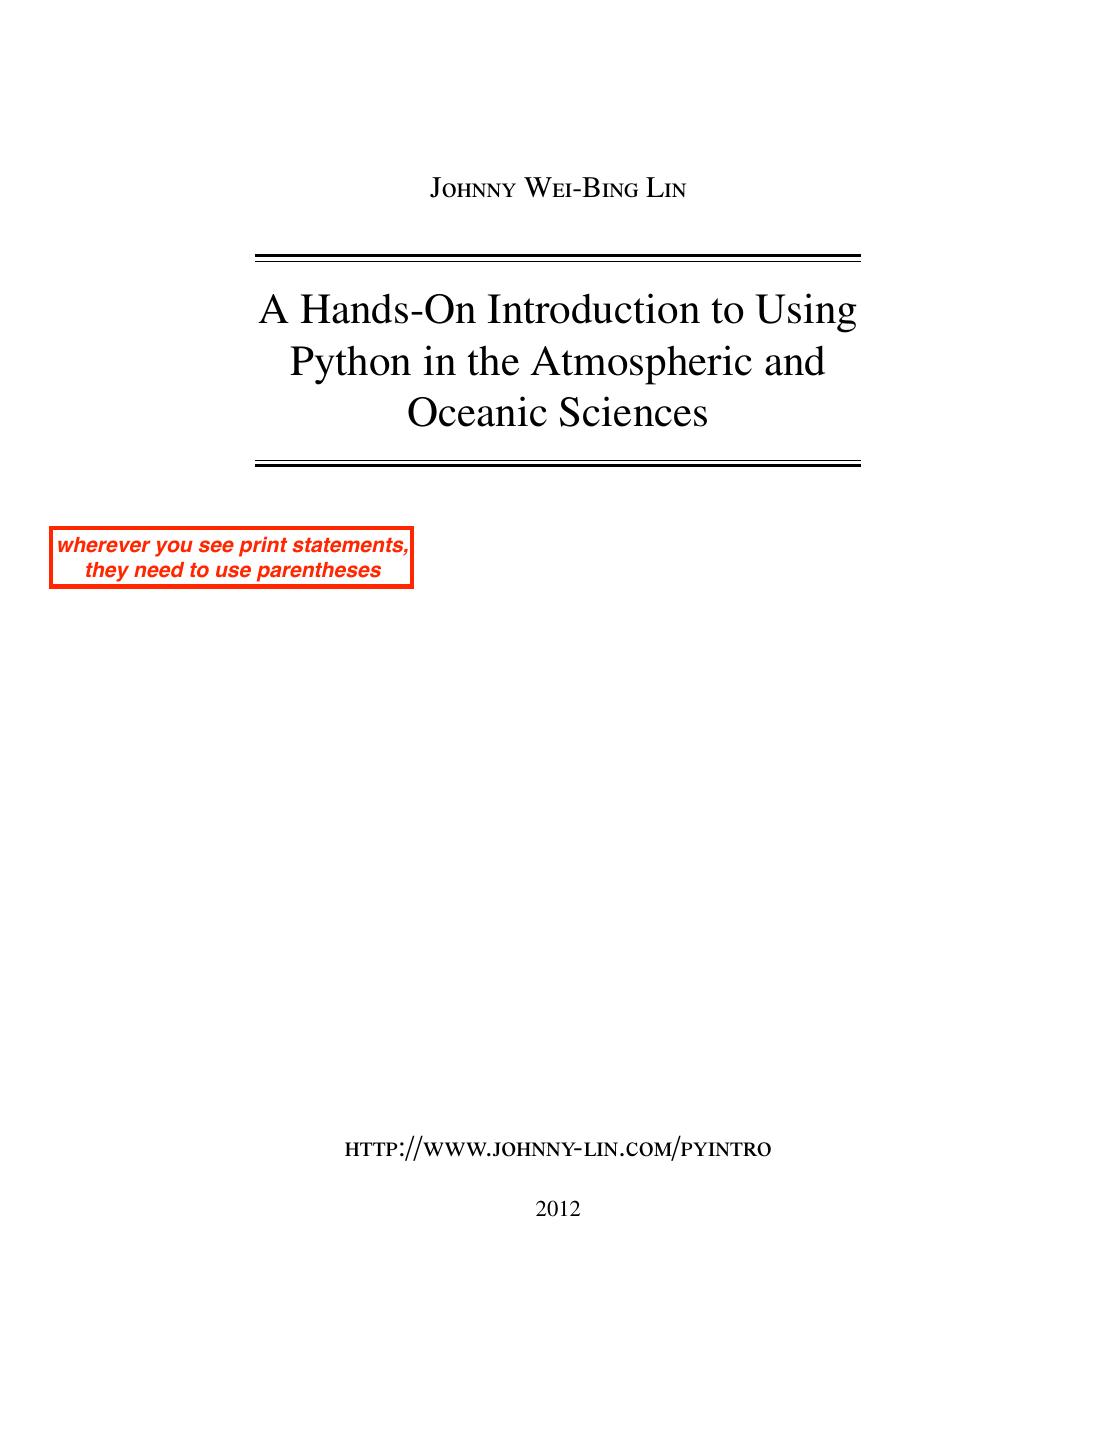 A Hands - On Introduction to Using Python in the Atmospheric and Oceanic Sciences by Johnny Wei - Bing Lin